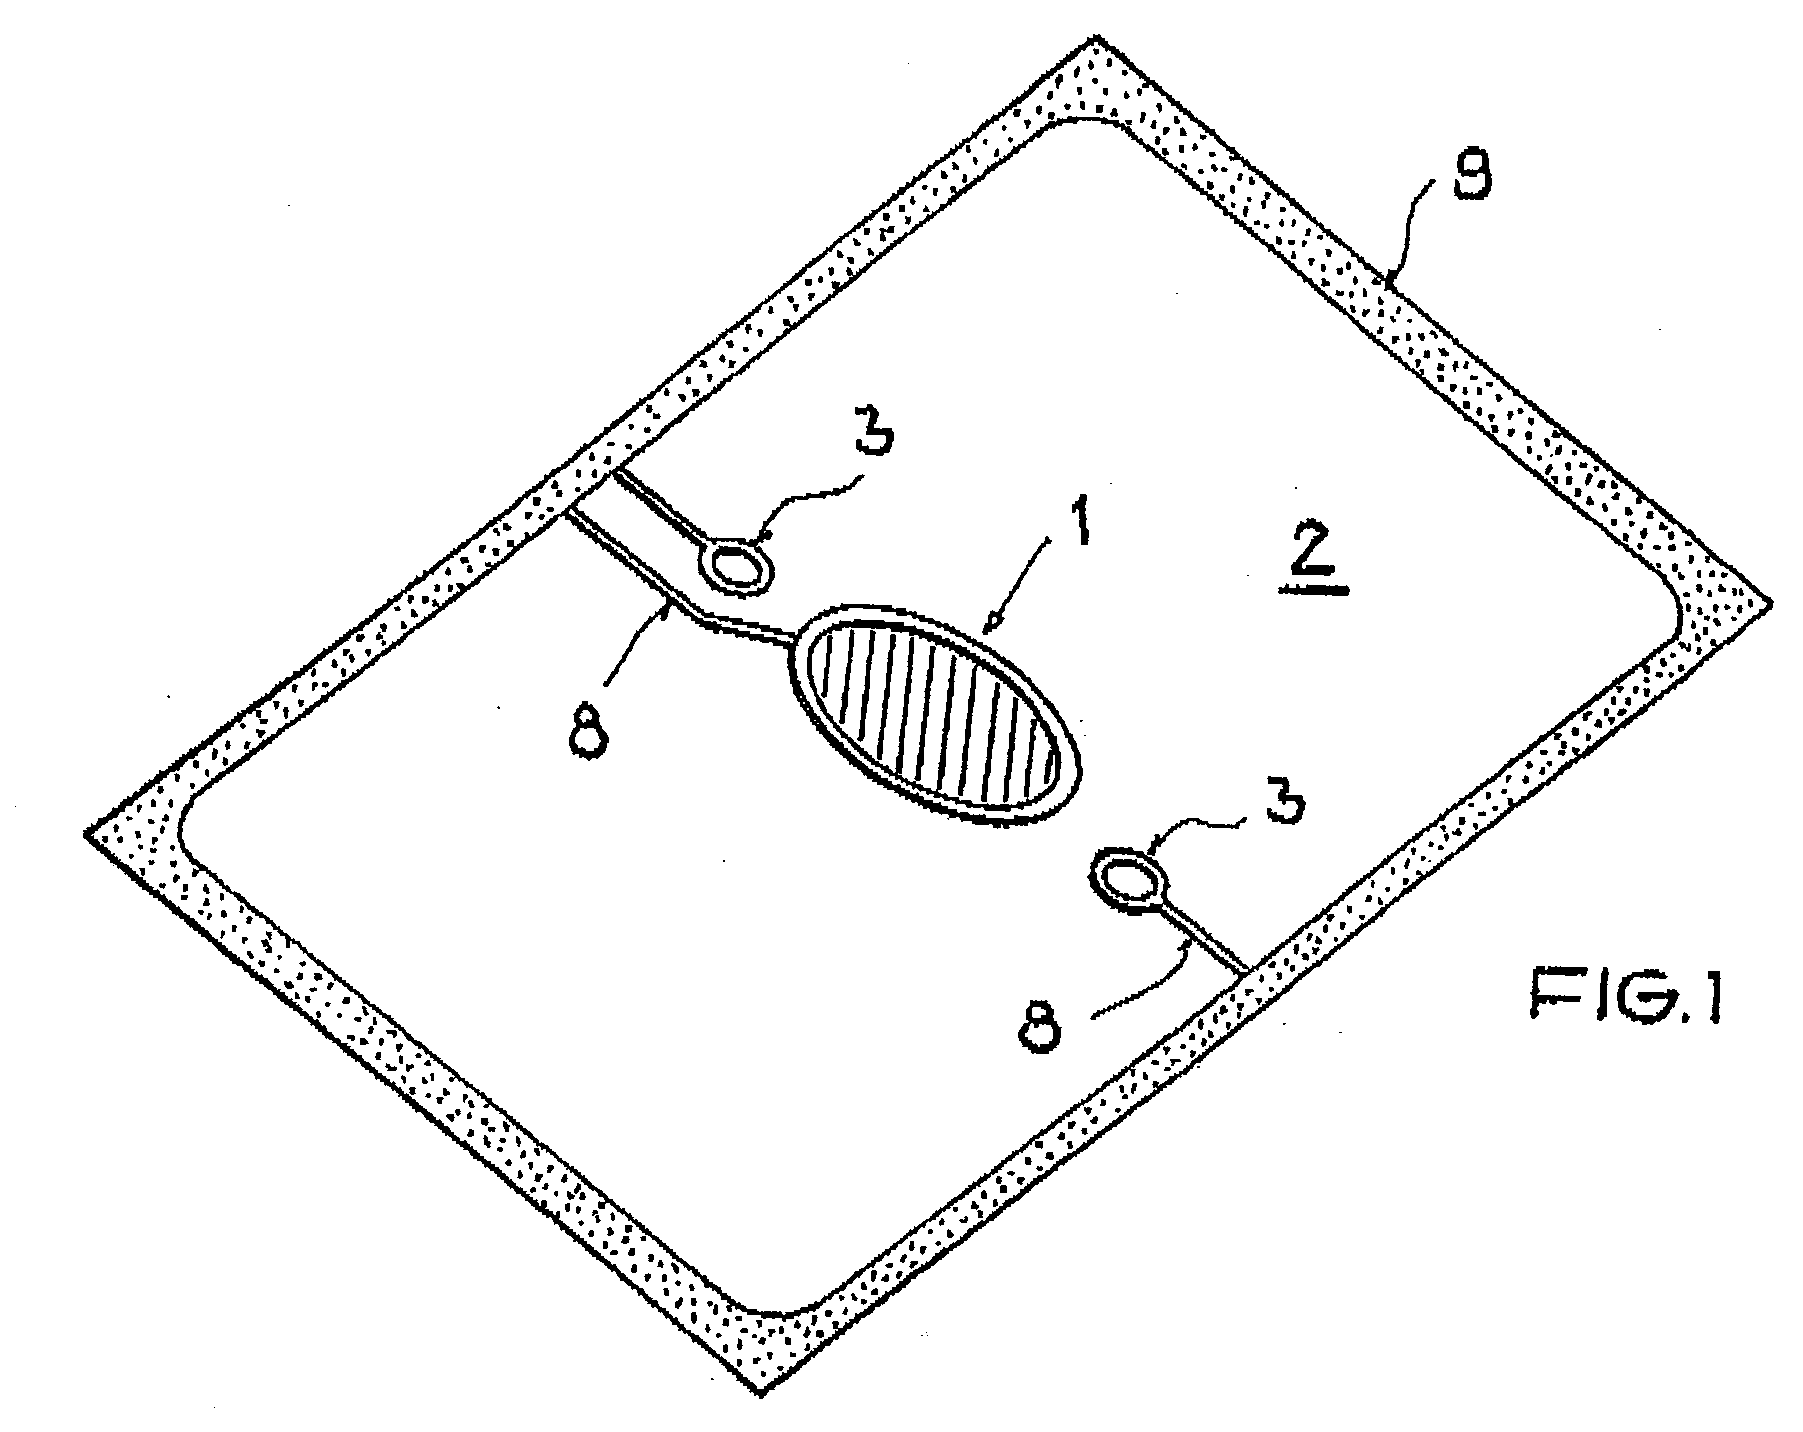 Light for the Passenger Compartment of a Motor Vehicle